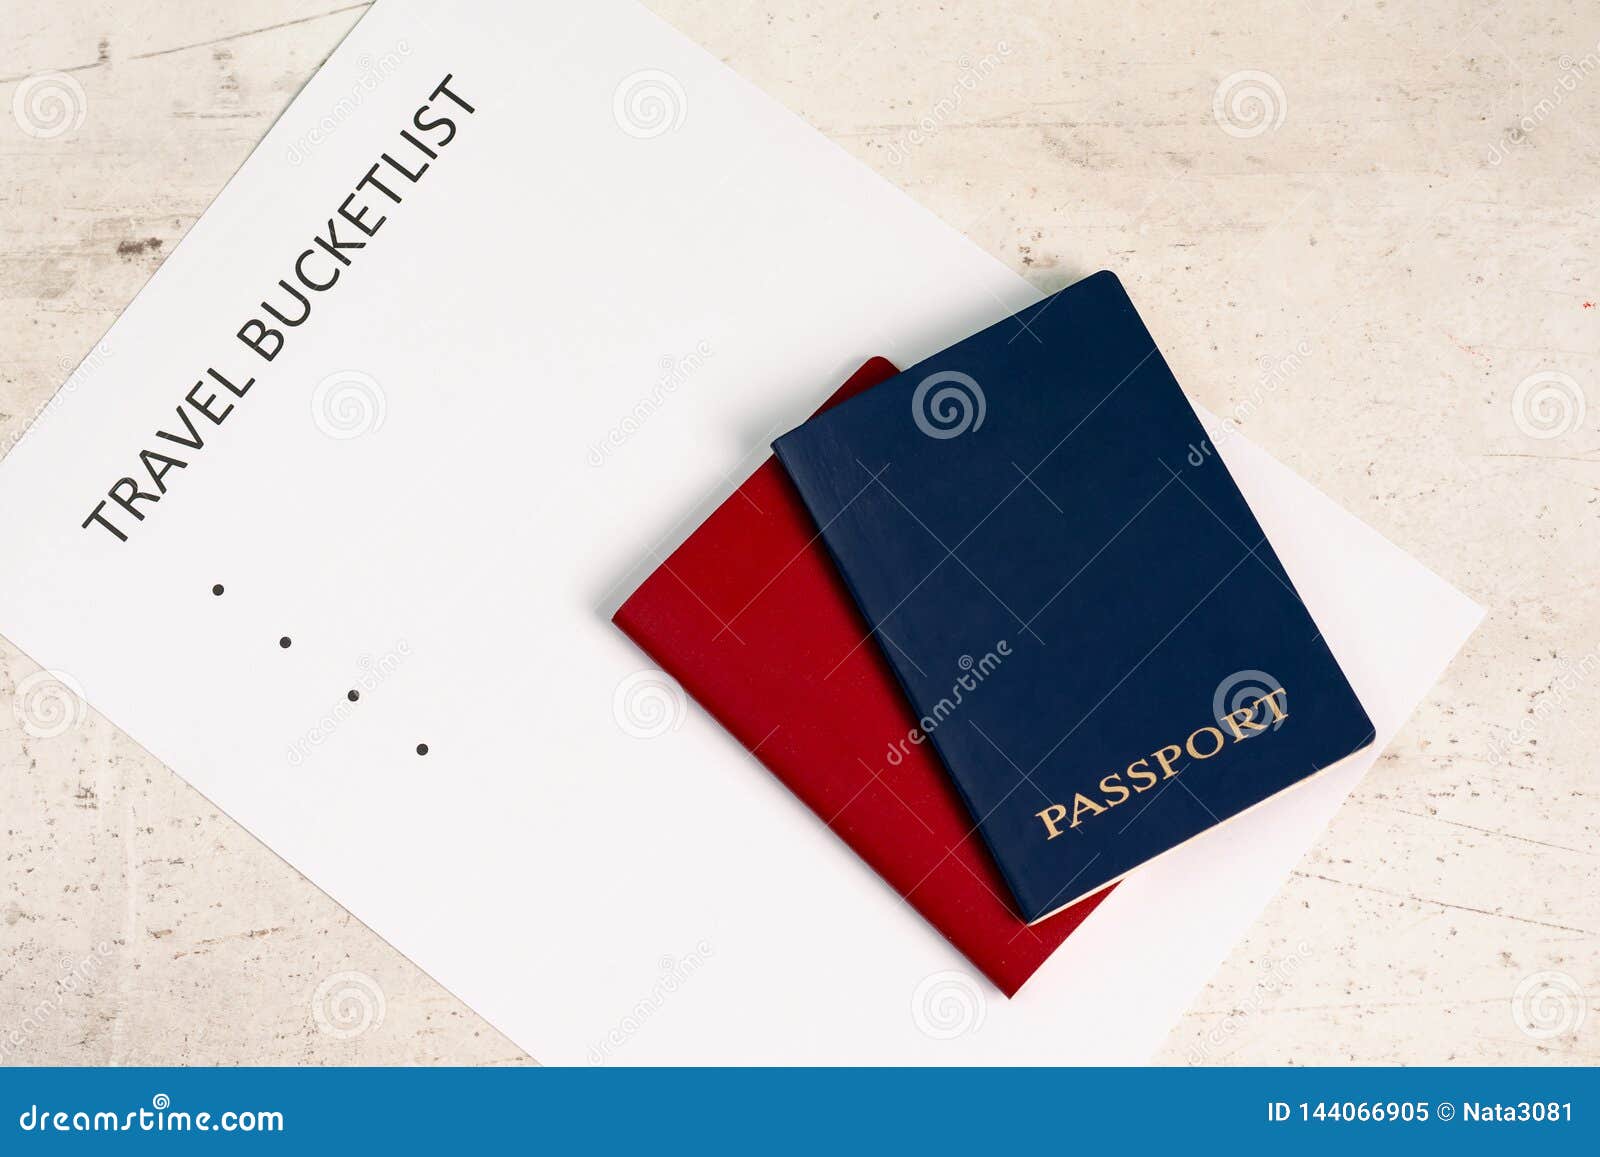 blue and red travel passports on a light background, next to the inscription travel bucketlist.